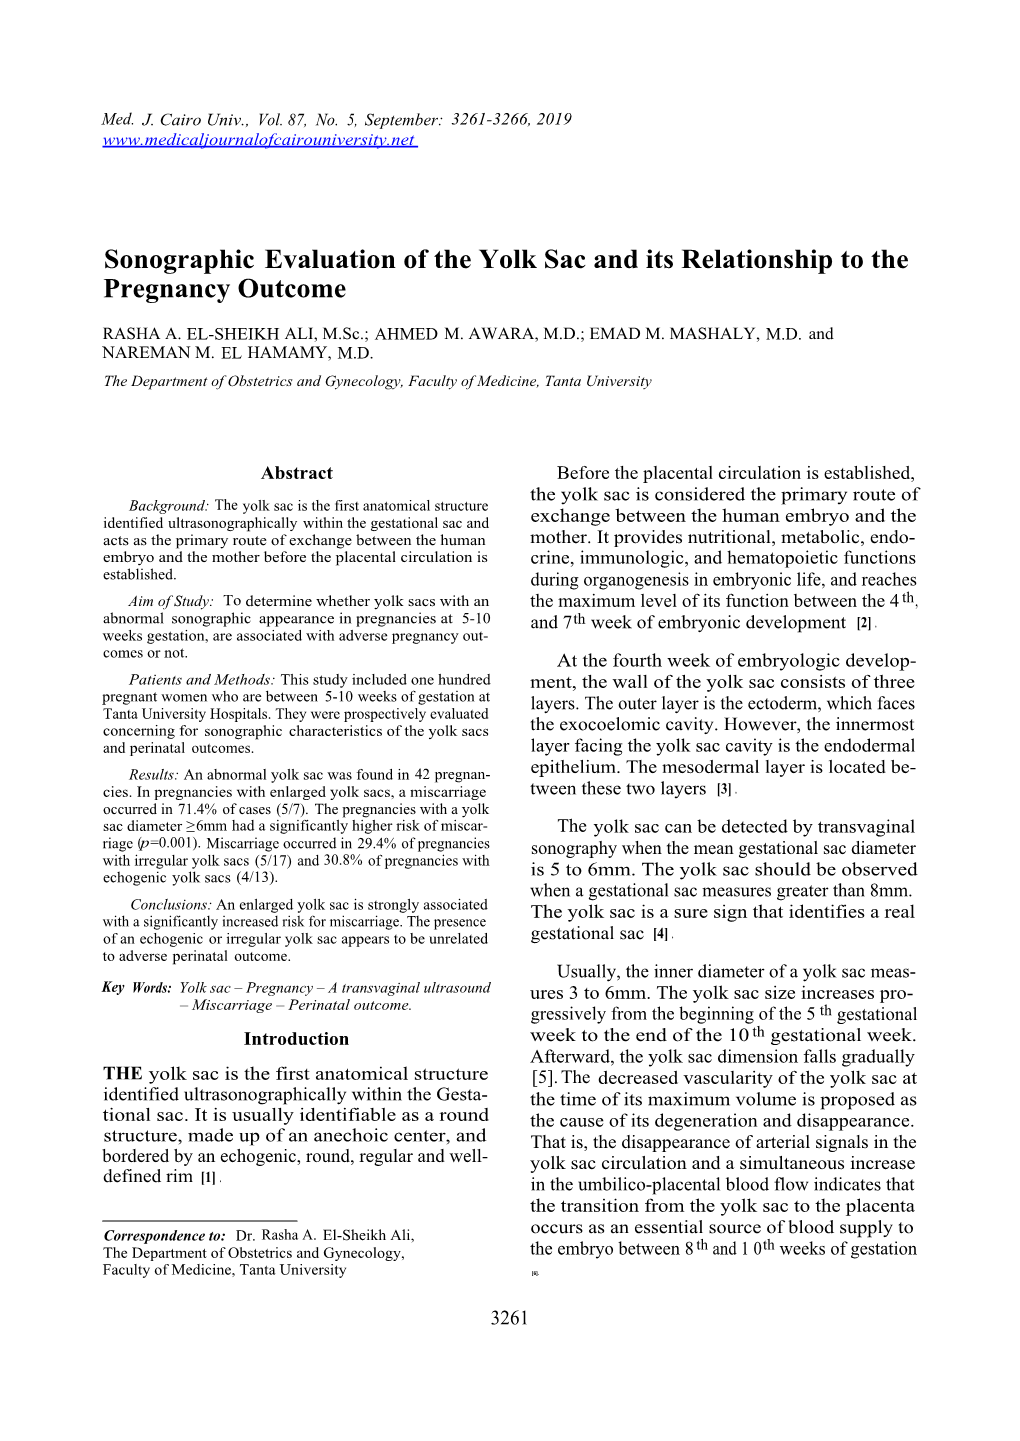 Sonographic Evaluation of the Yolk Sac and Its Relationship to The